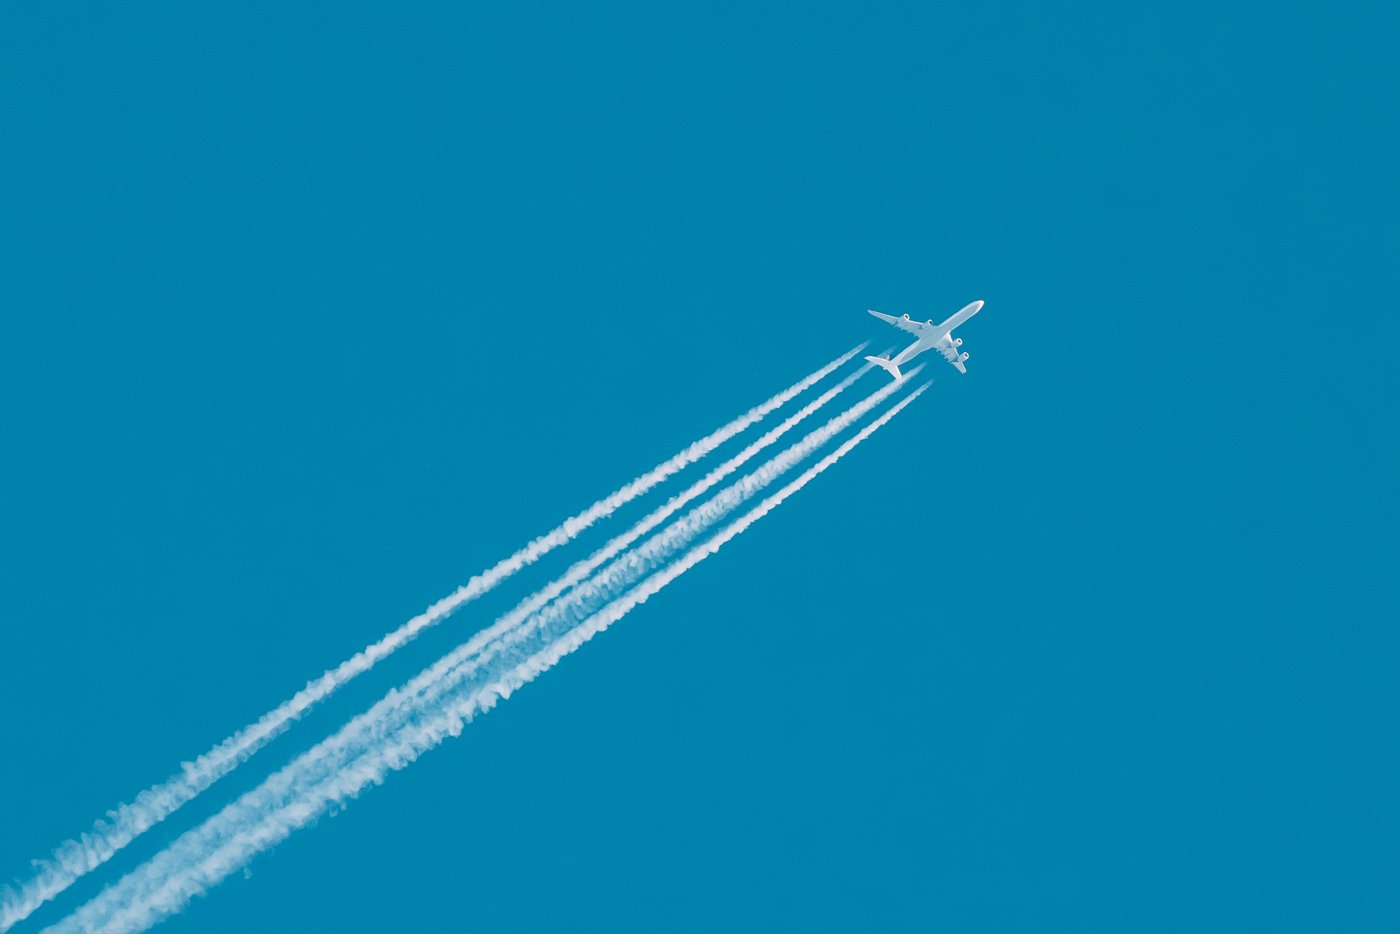 Jet plane flying with white trails from engines